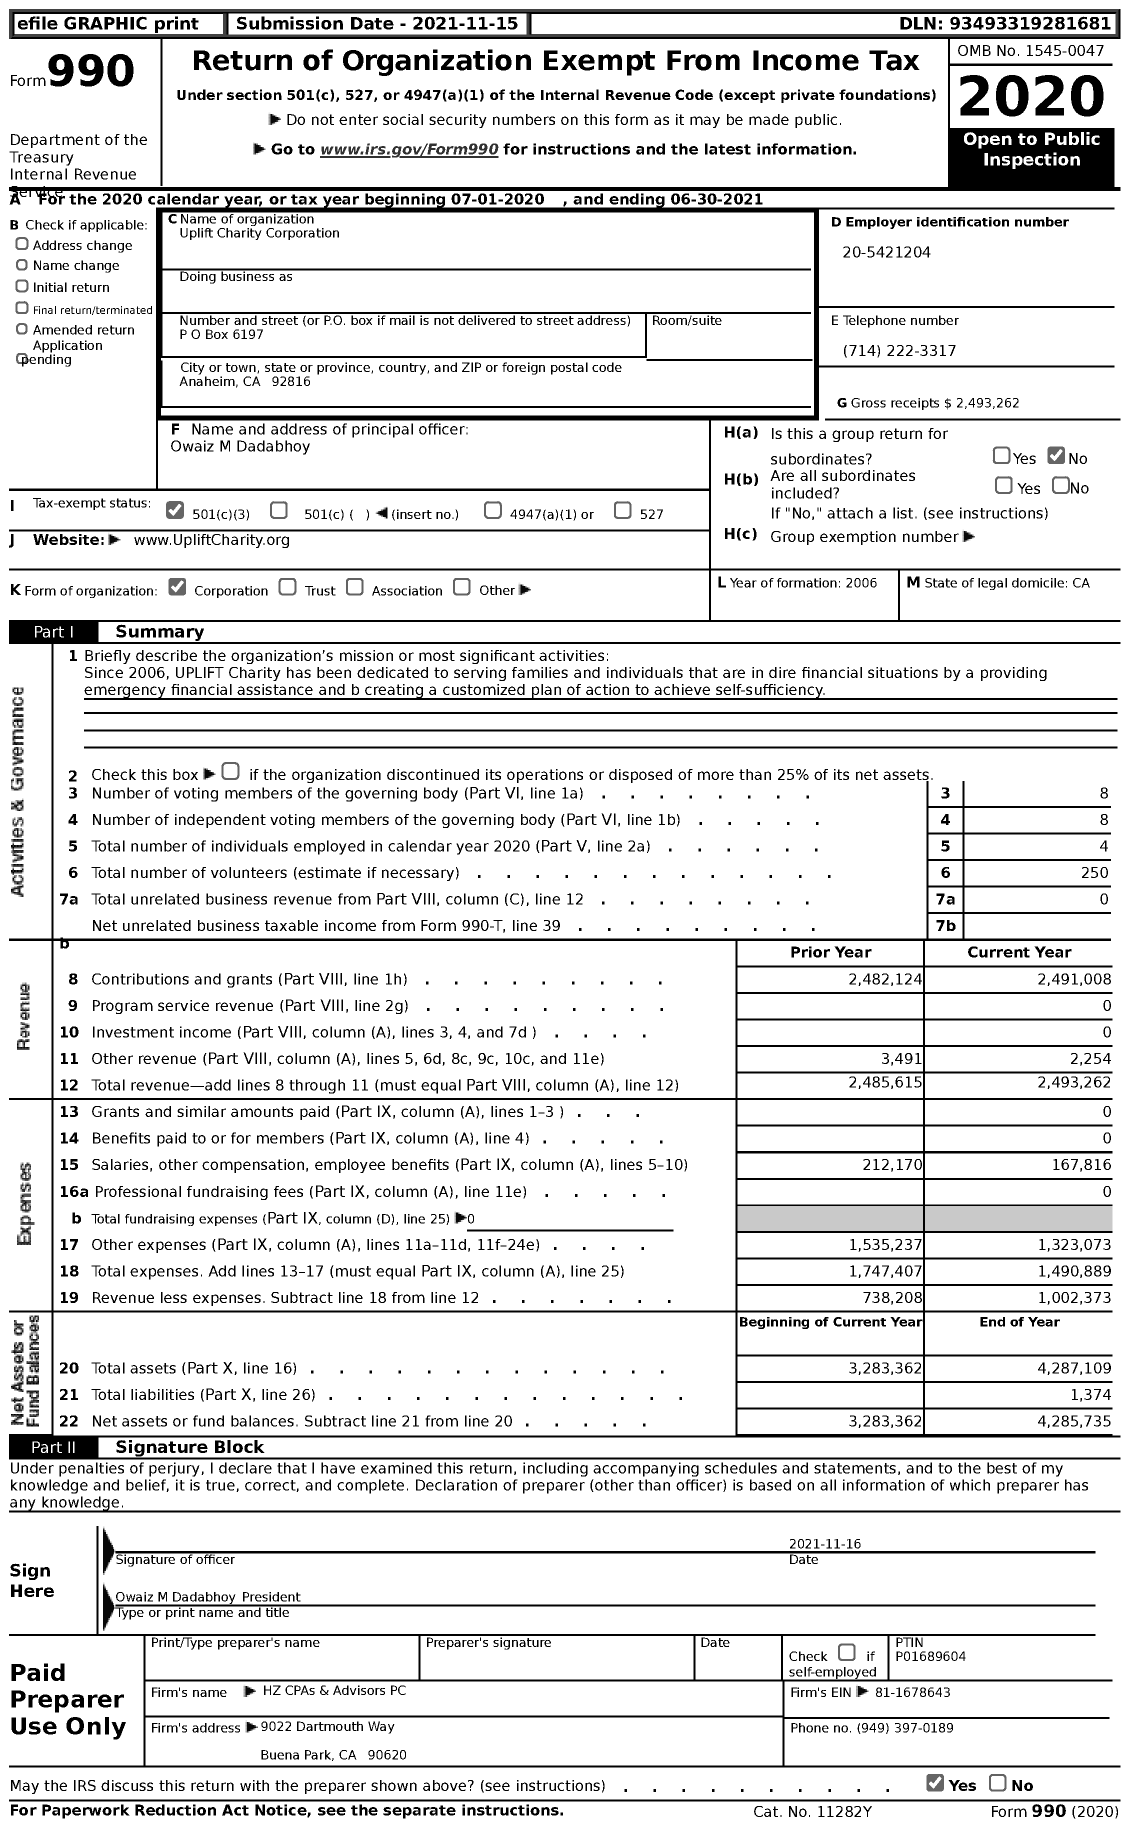 Image of first page of 2020 Form 990 for UPLIFT Charity